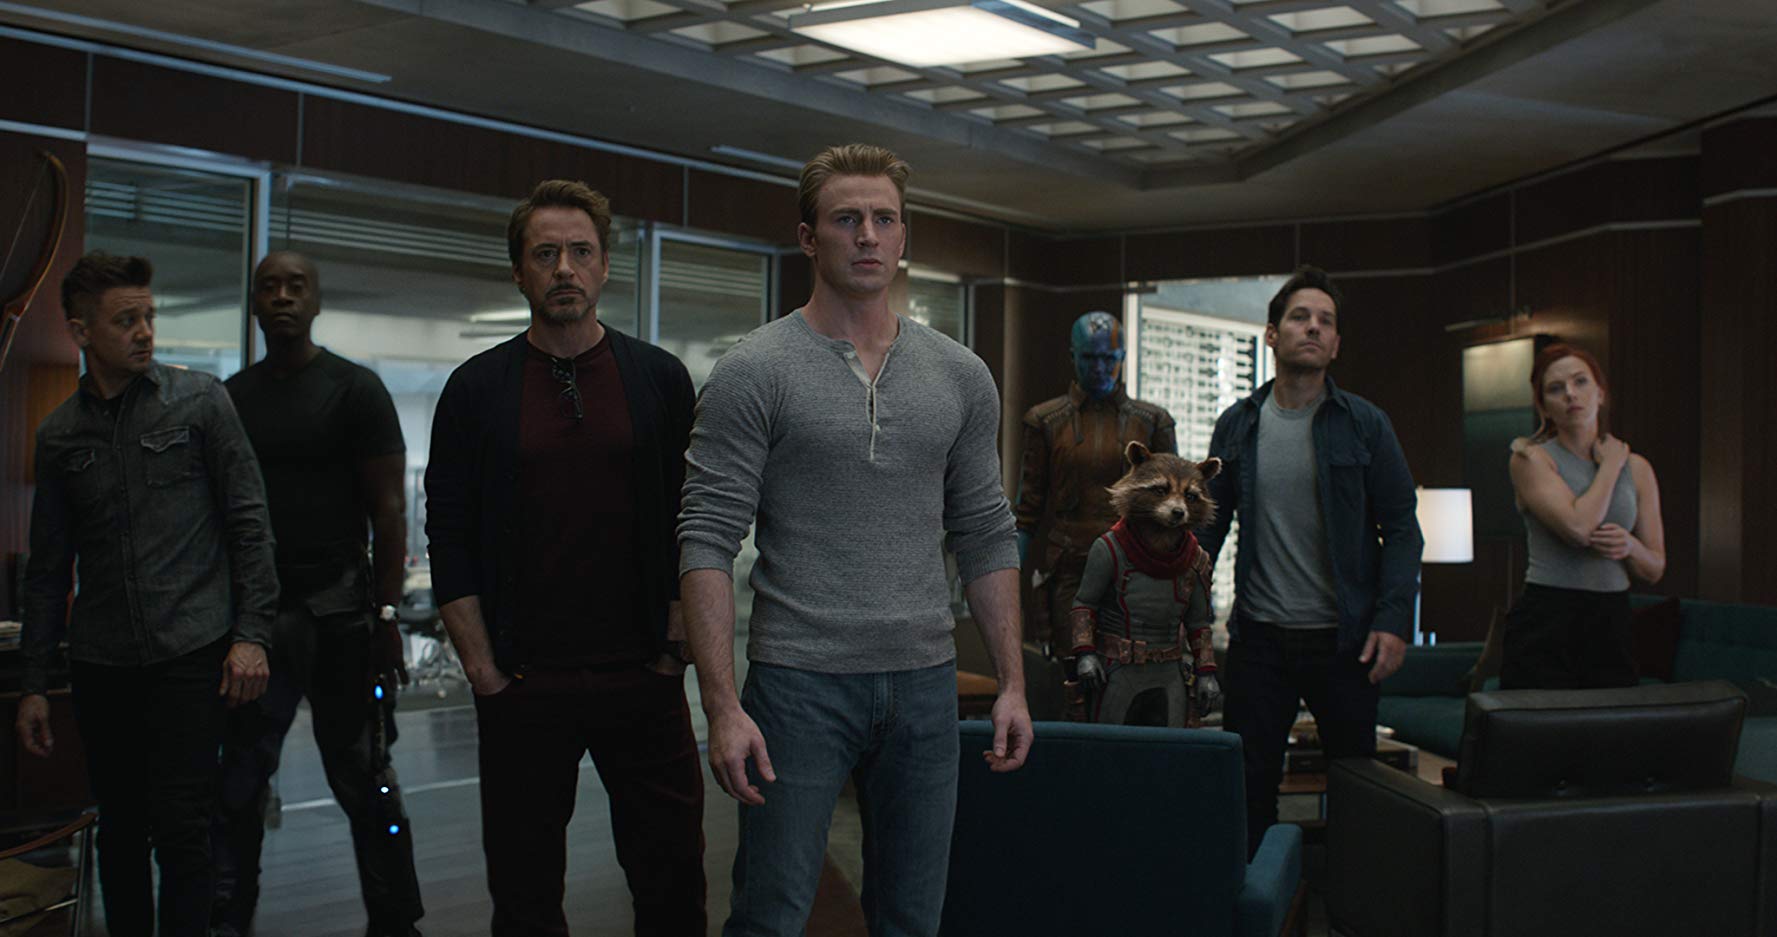 Film Review: “Avengers: Endgame” – The UCSD Guardian